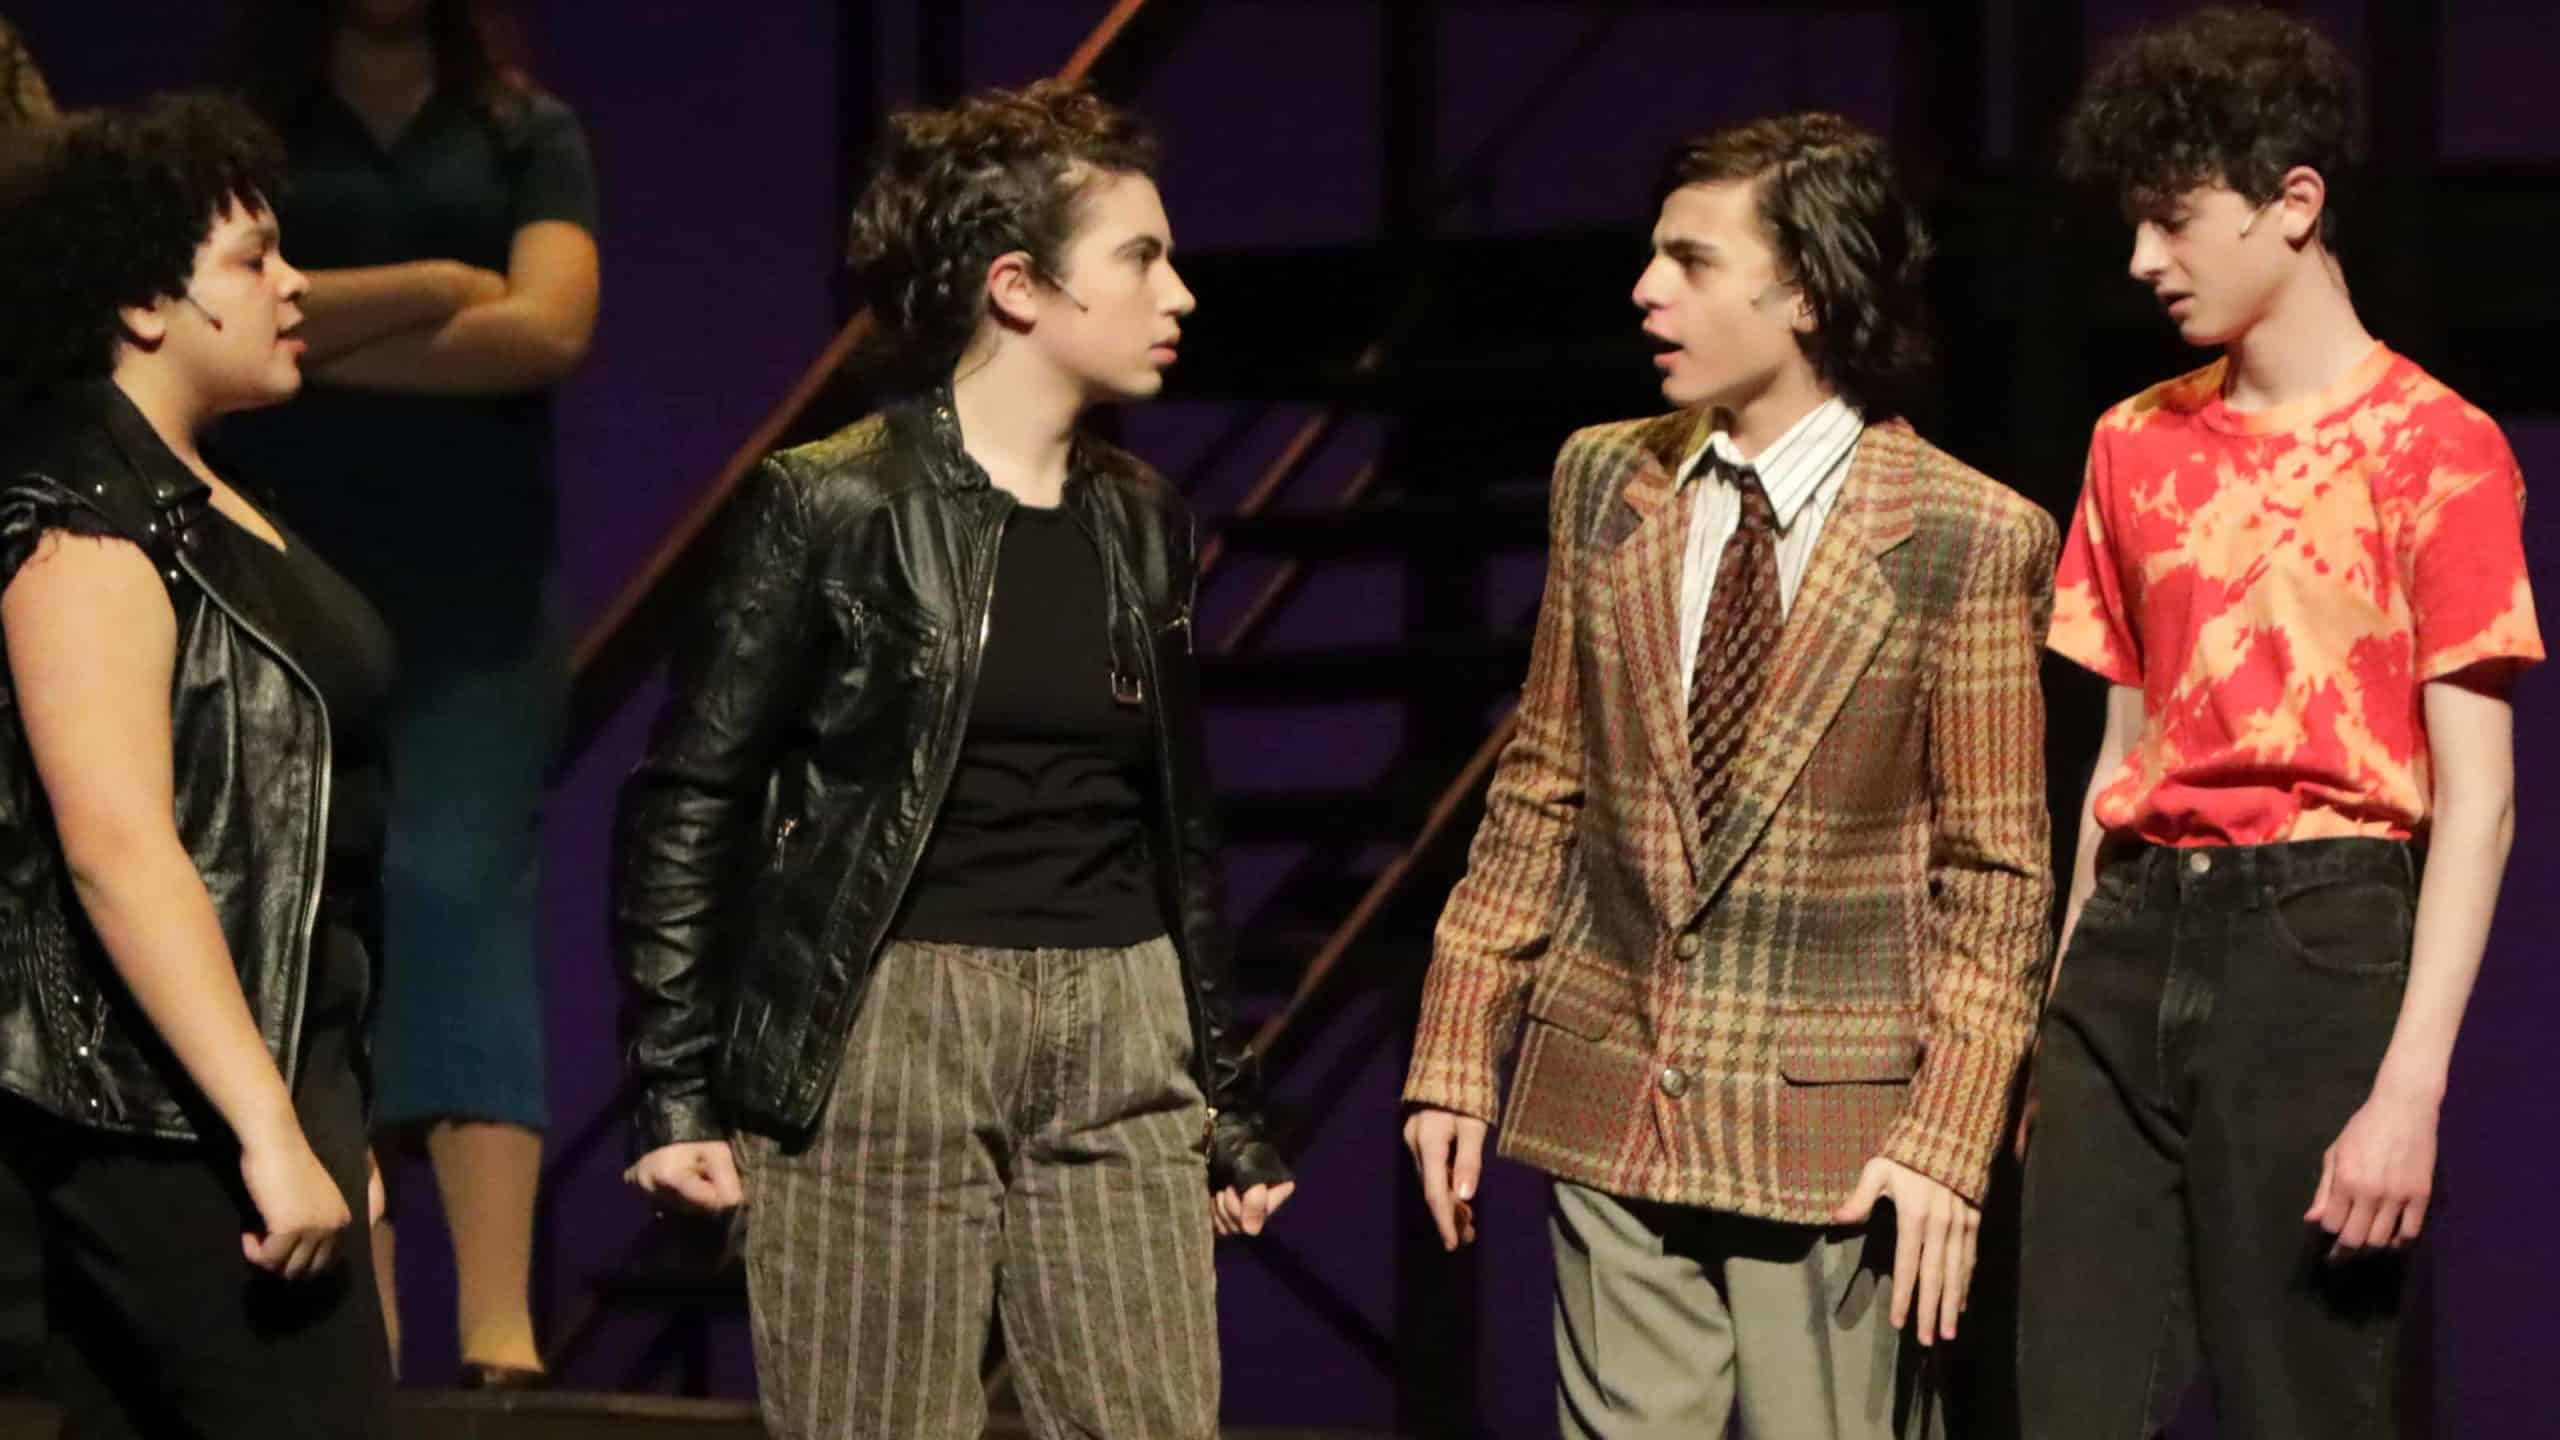 Izzy Brown, Elizabeth Erwin, Ben Glockner and Alex Boyd face off in in Footloose with the Berkshire Theatre Group. Press photo courtesy of BTG.